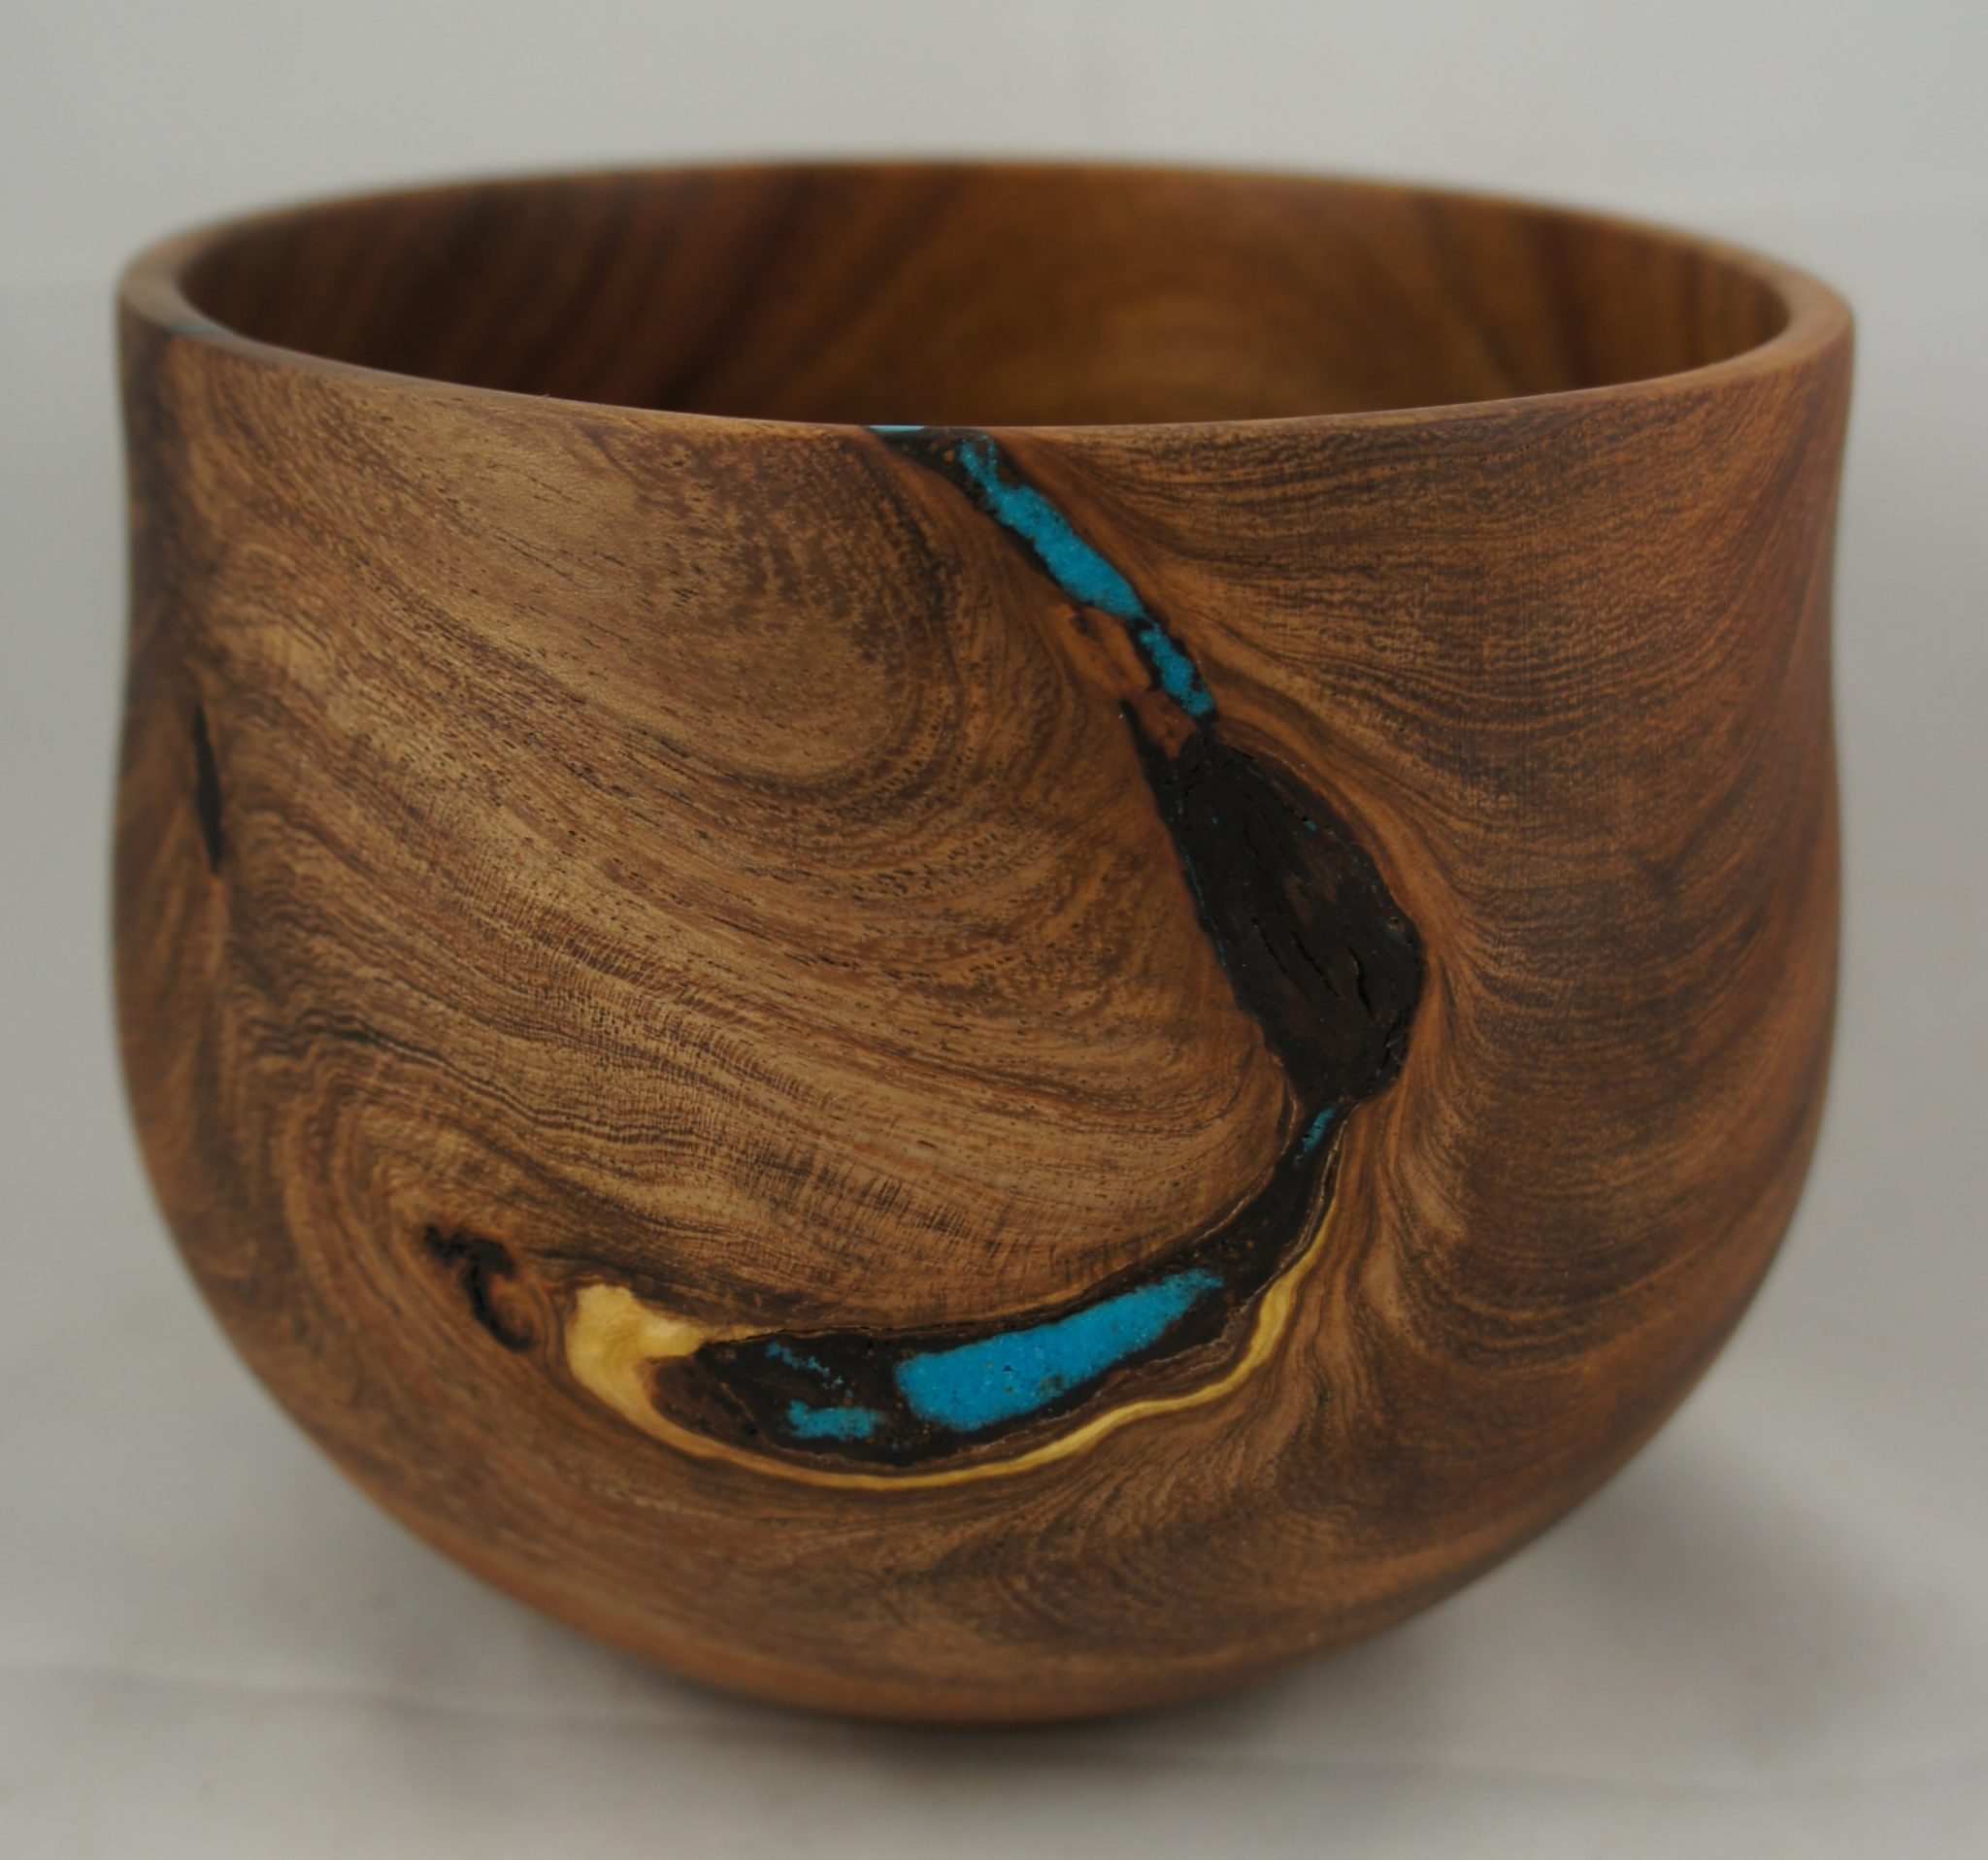 Mesquite bowl with turquoise embellishments